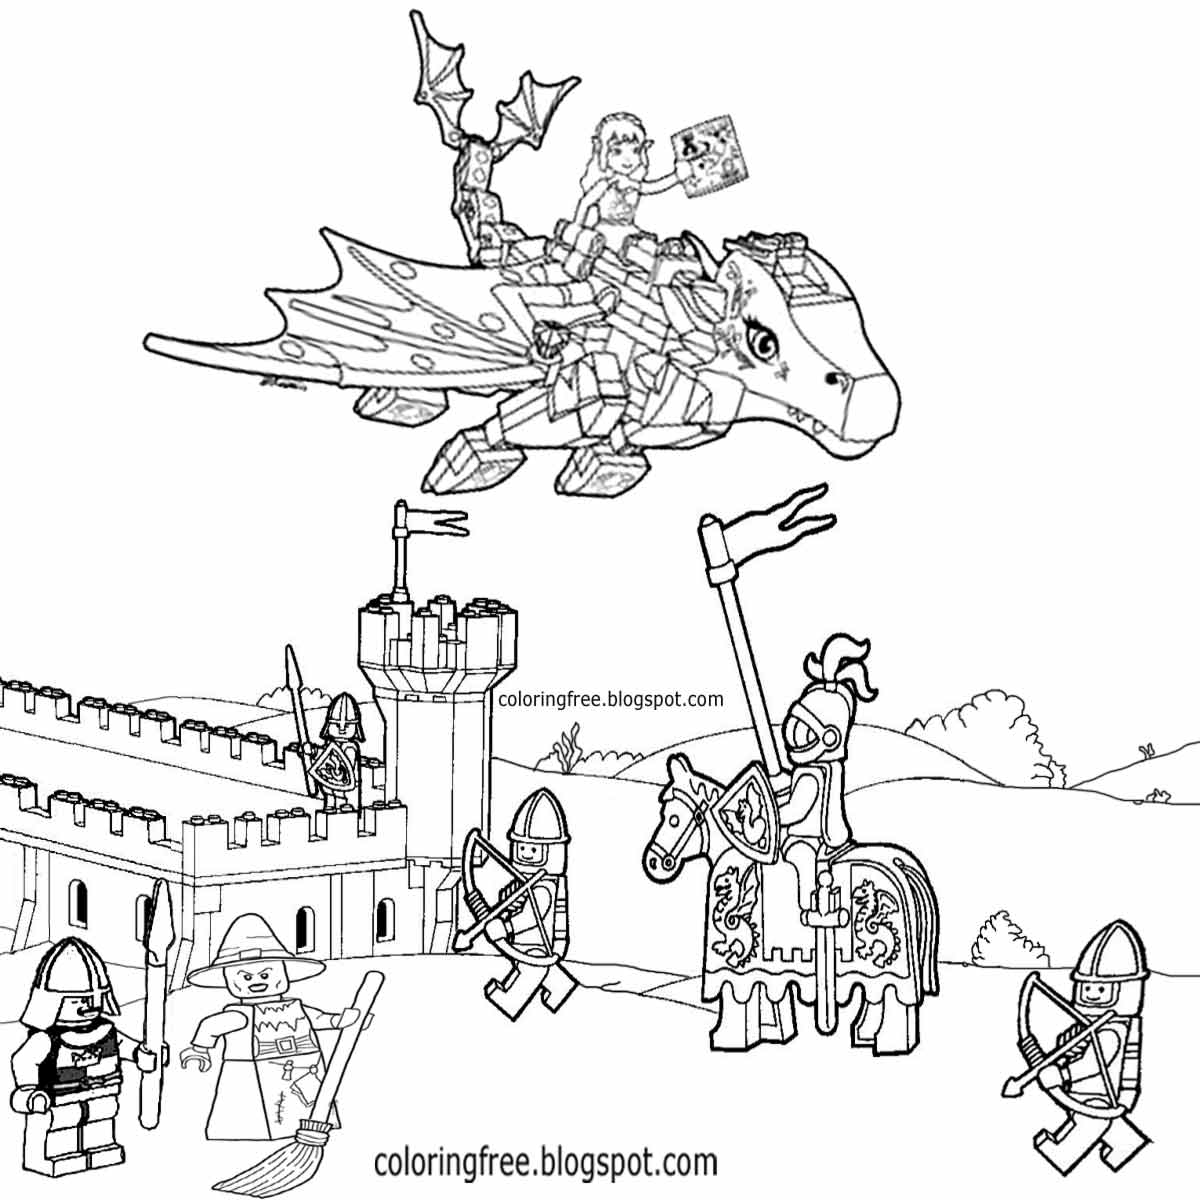 Free Coloring Pages Printable Pictures To Color Kids Drawing ideas: Dark  Ages Medieval coloring pages for teenagers printable